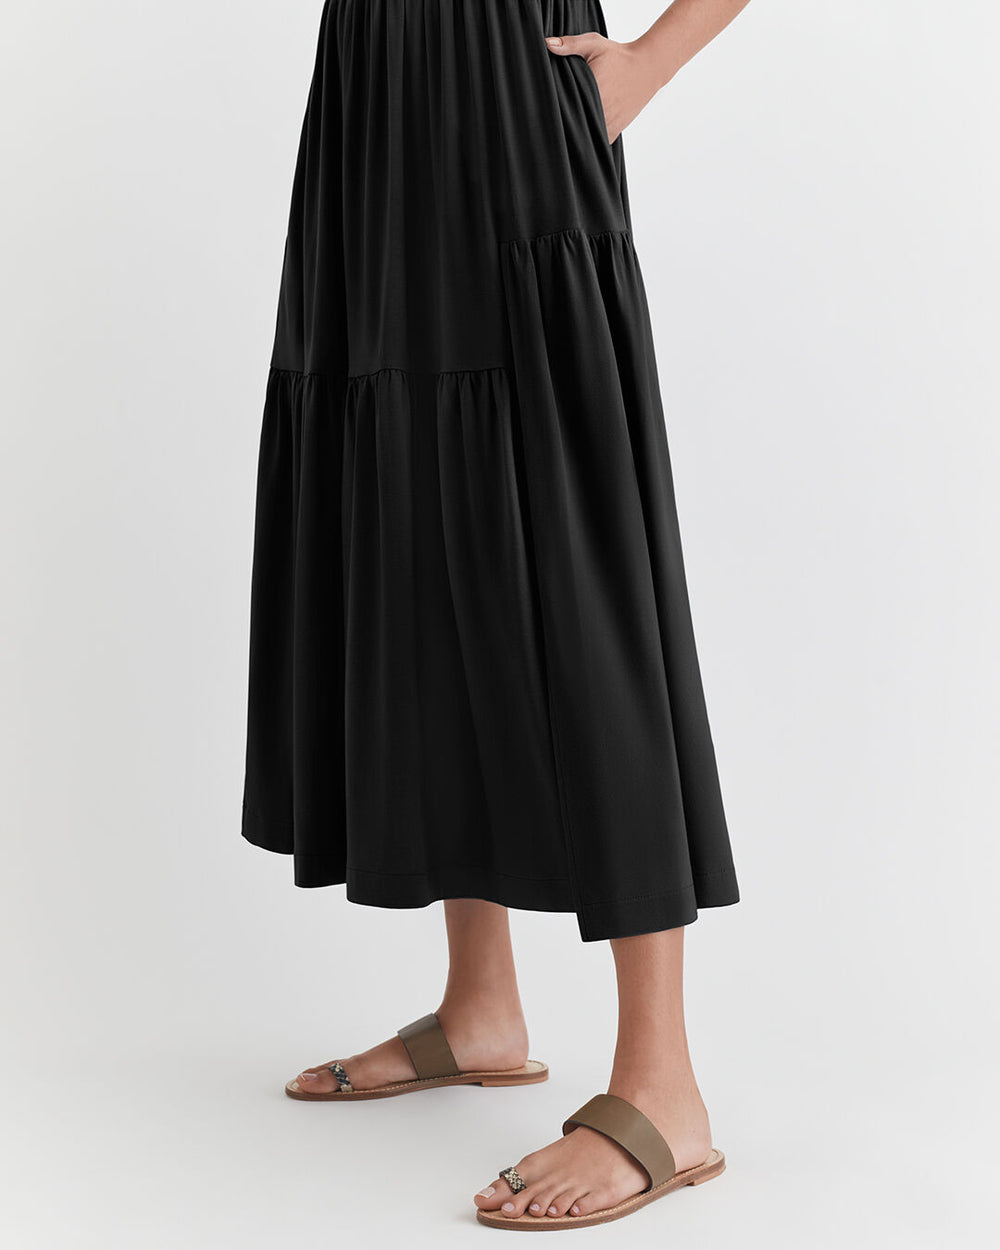 Person wearing a tiered long skirt and flat sandals, partial view.